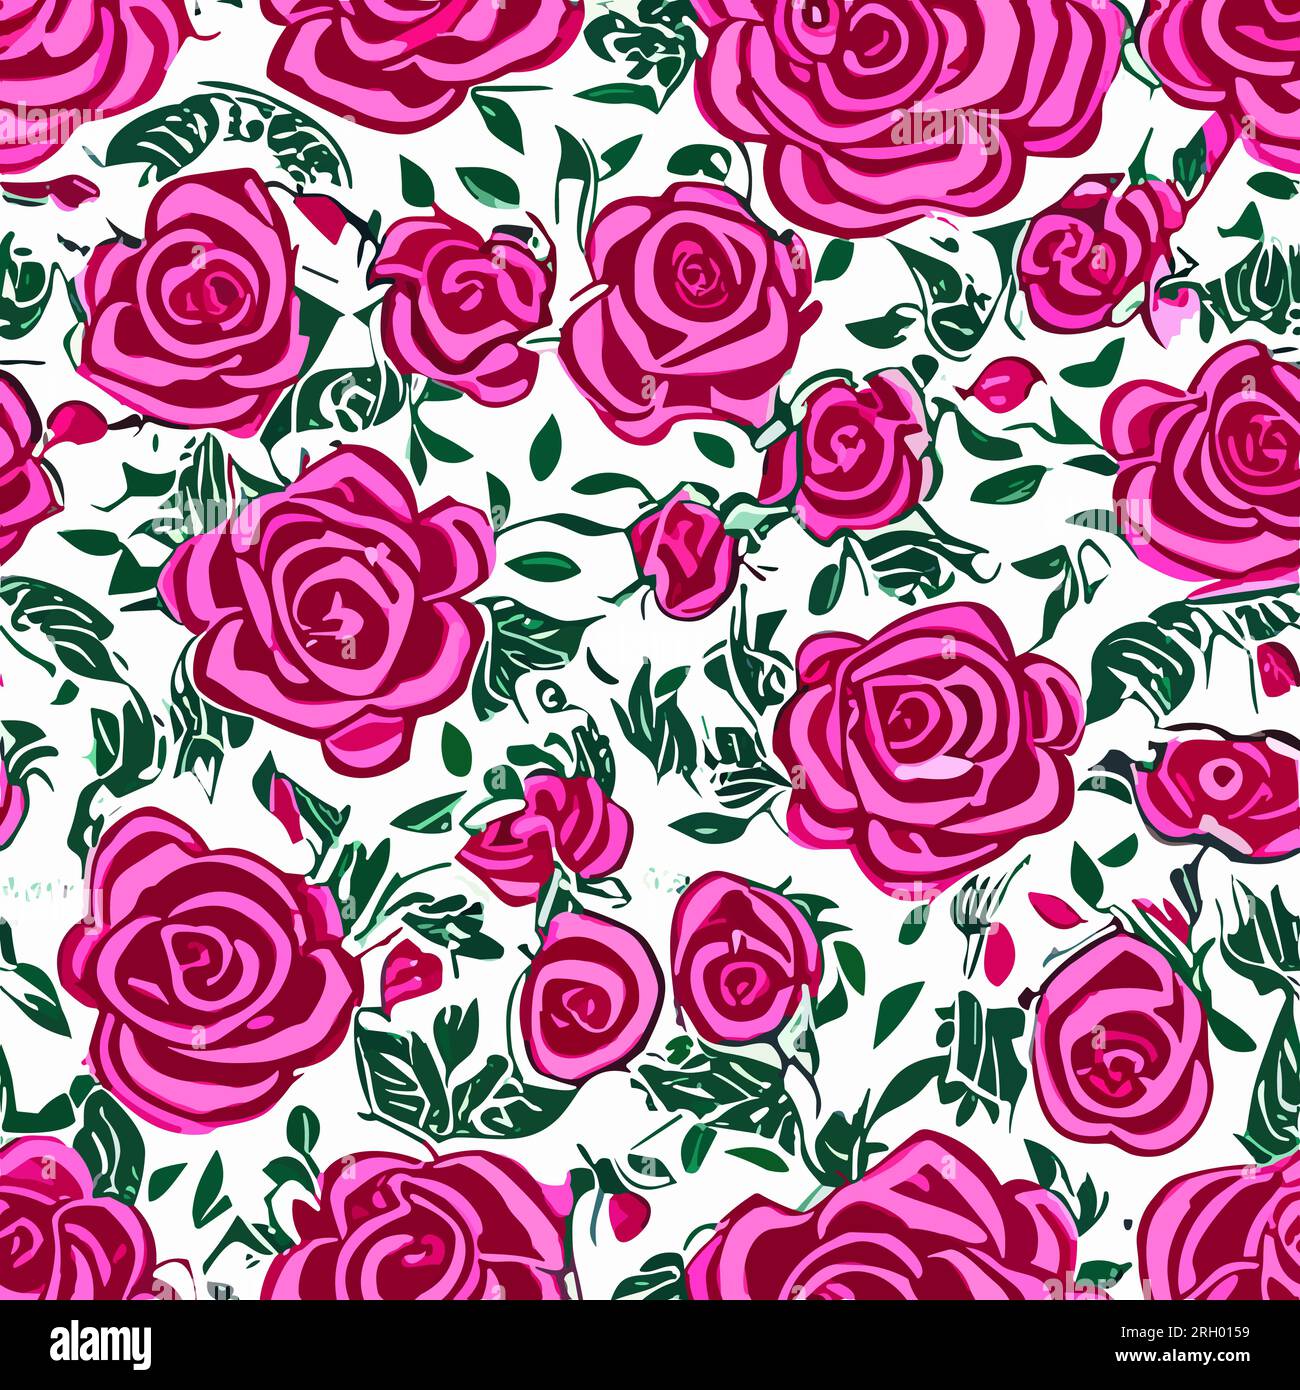 Pink Floral Vintage Seamless Pattern Svg Graphic by aneisspiaf